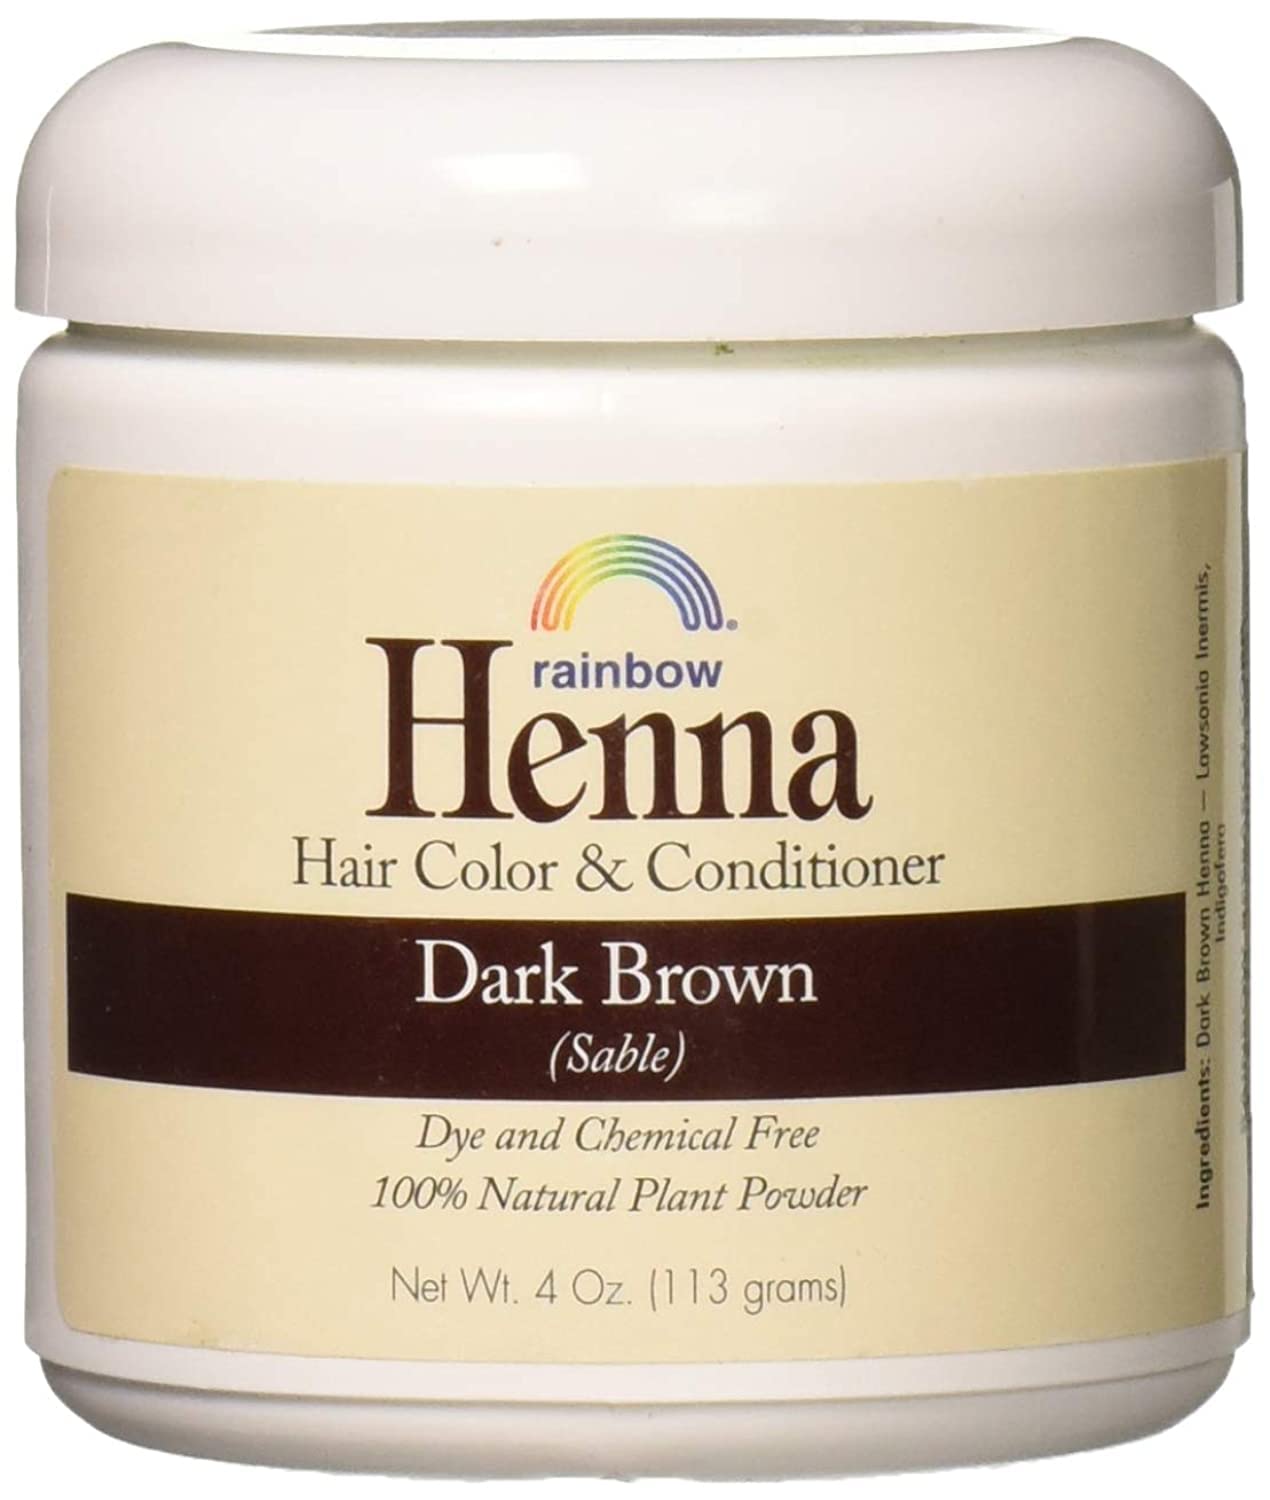 Rainbow Research Henna Hair Color and Conditioner Persian Dark Brown Sable - 4 oz